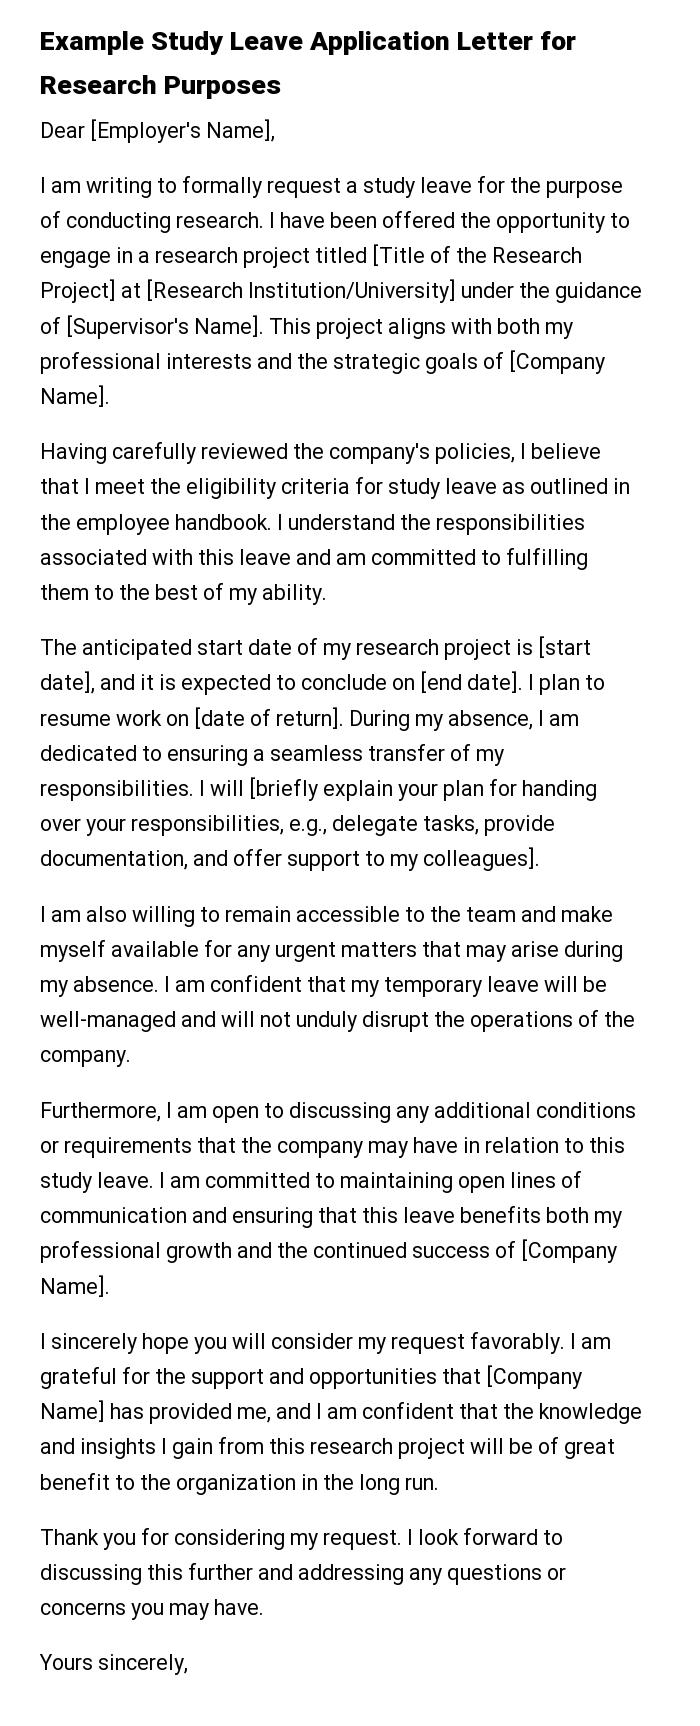 Example Study Leave Application Letter for Research Purposes